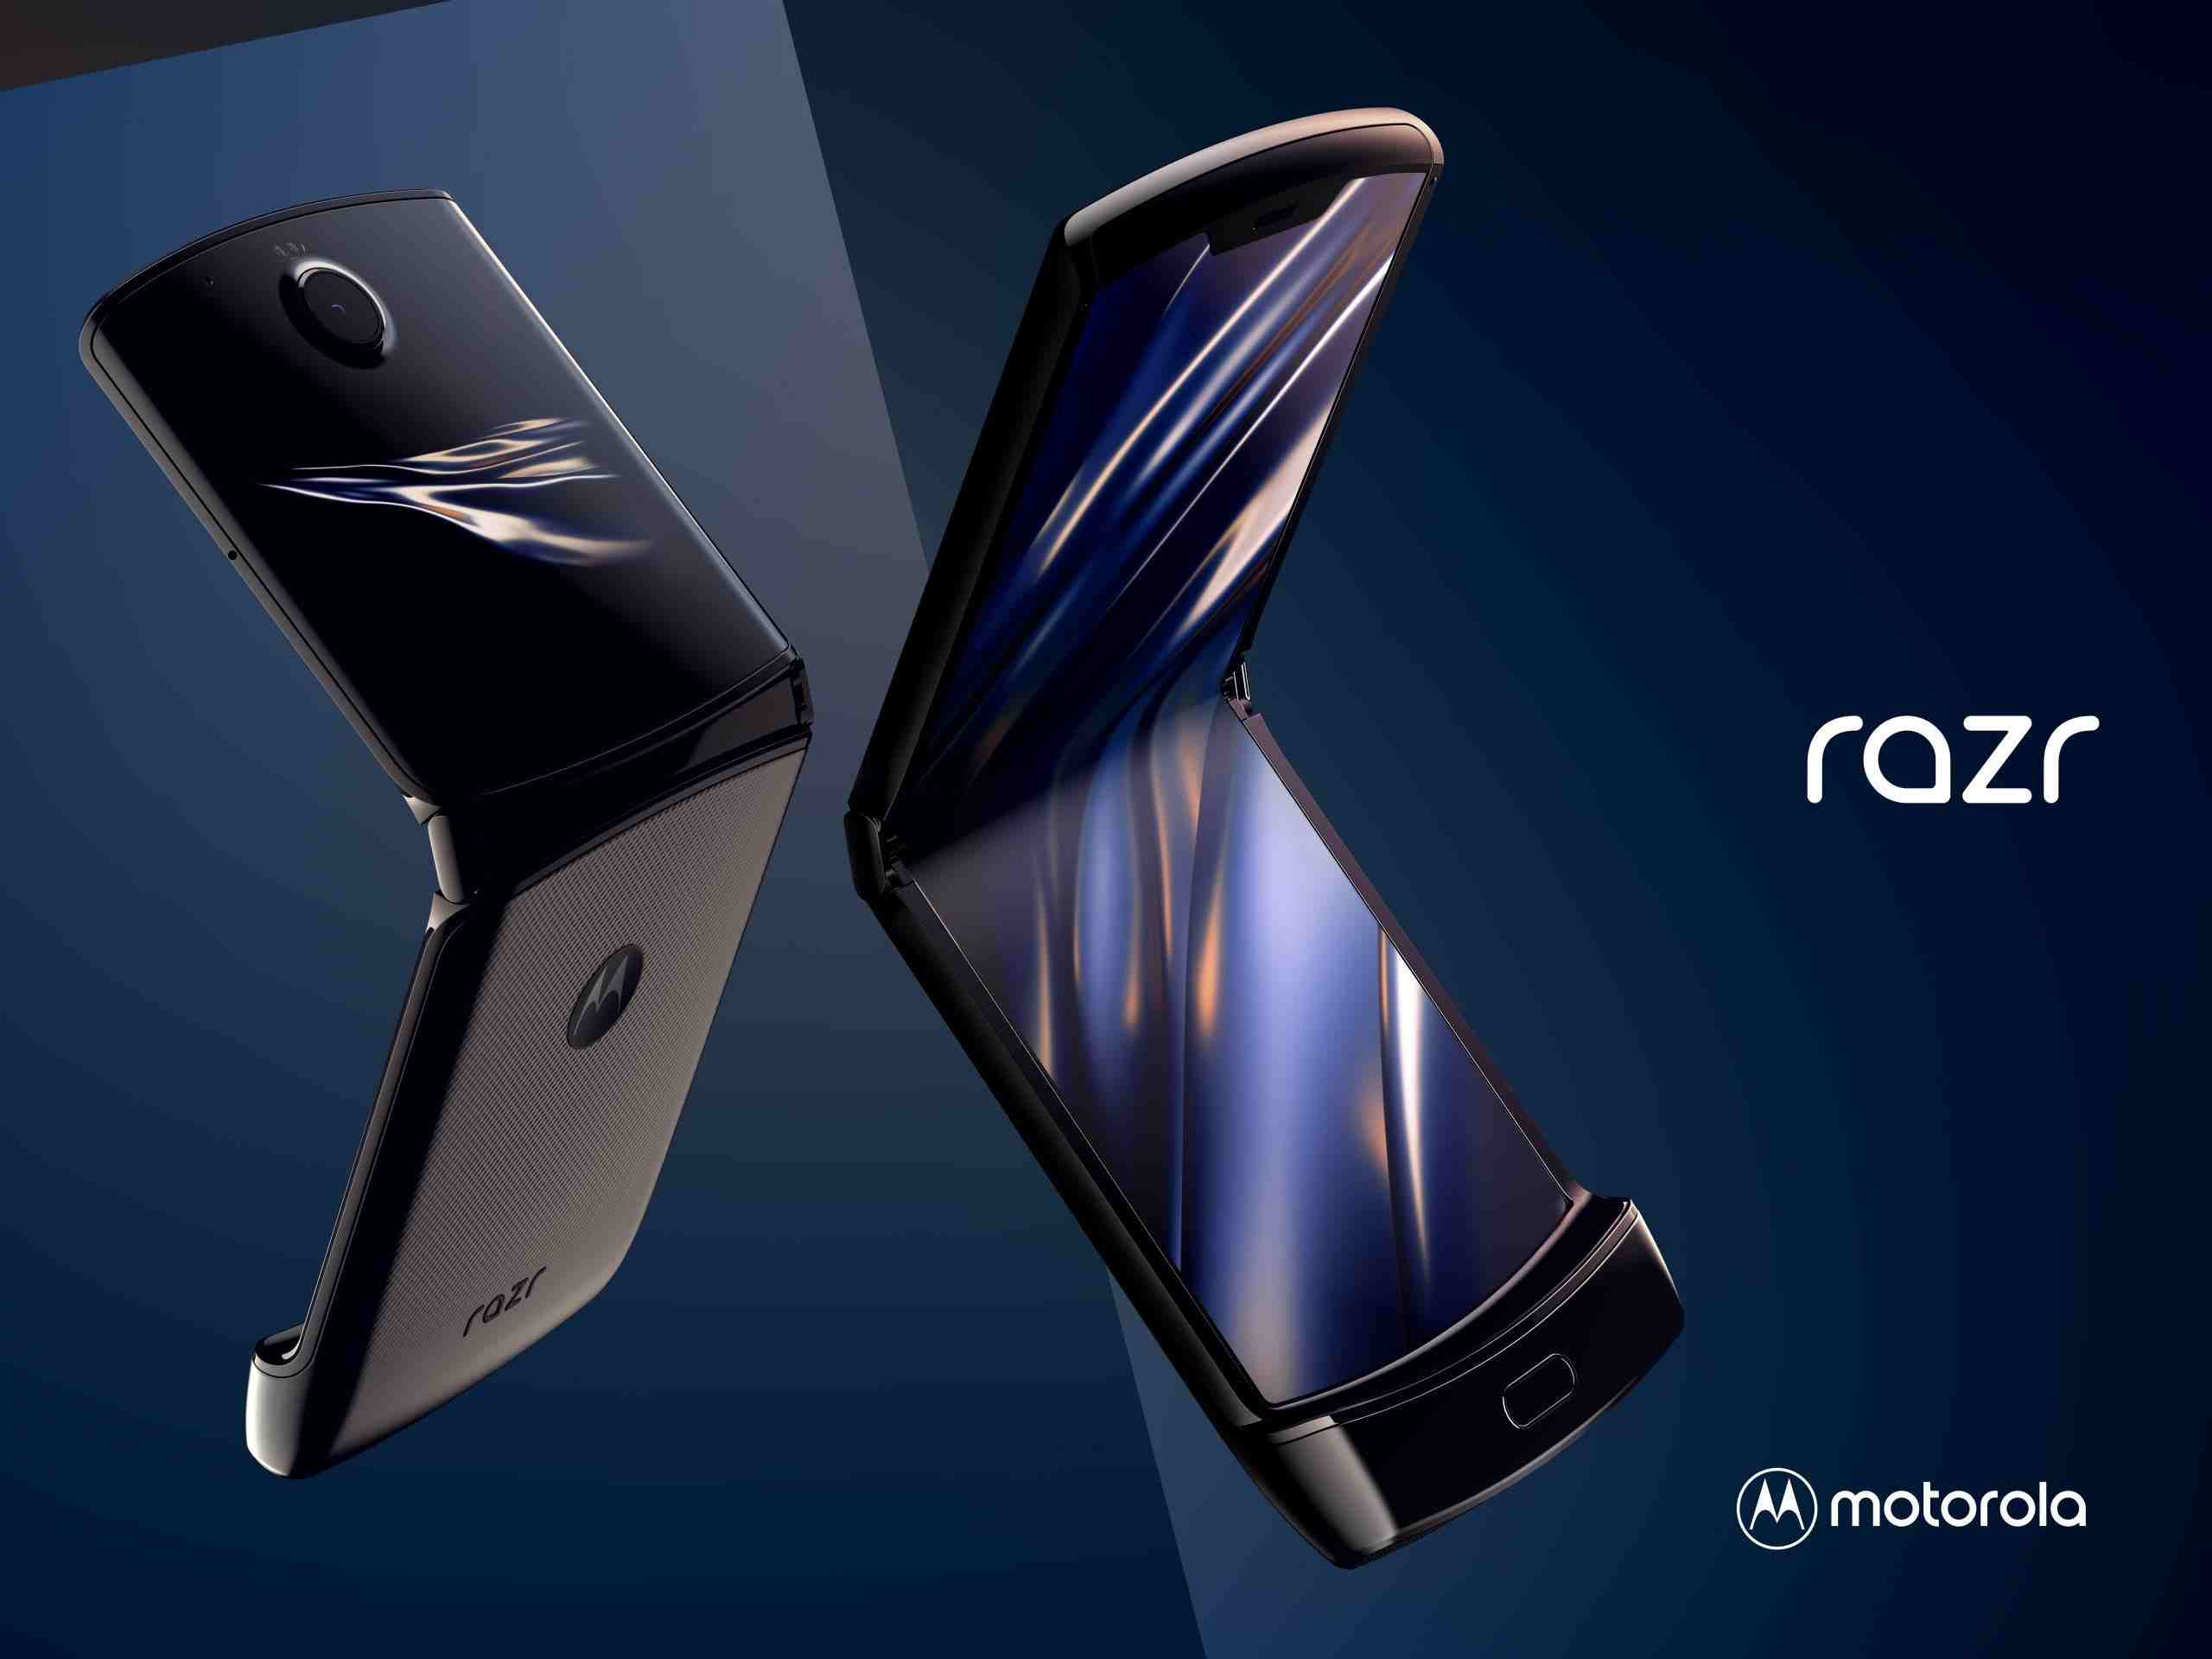 The Motorola Razr Smartphone from two different angles